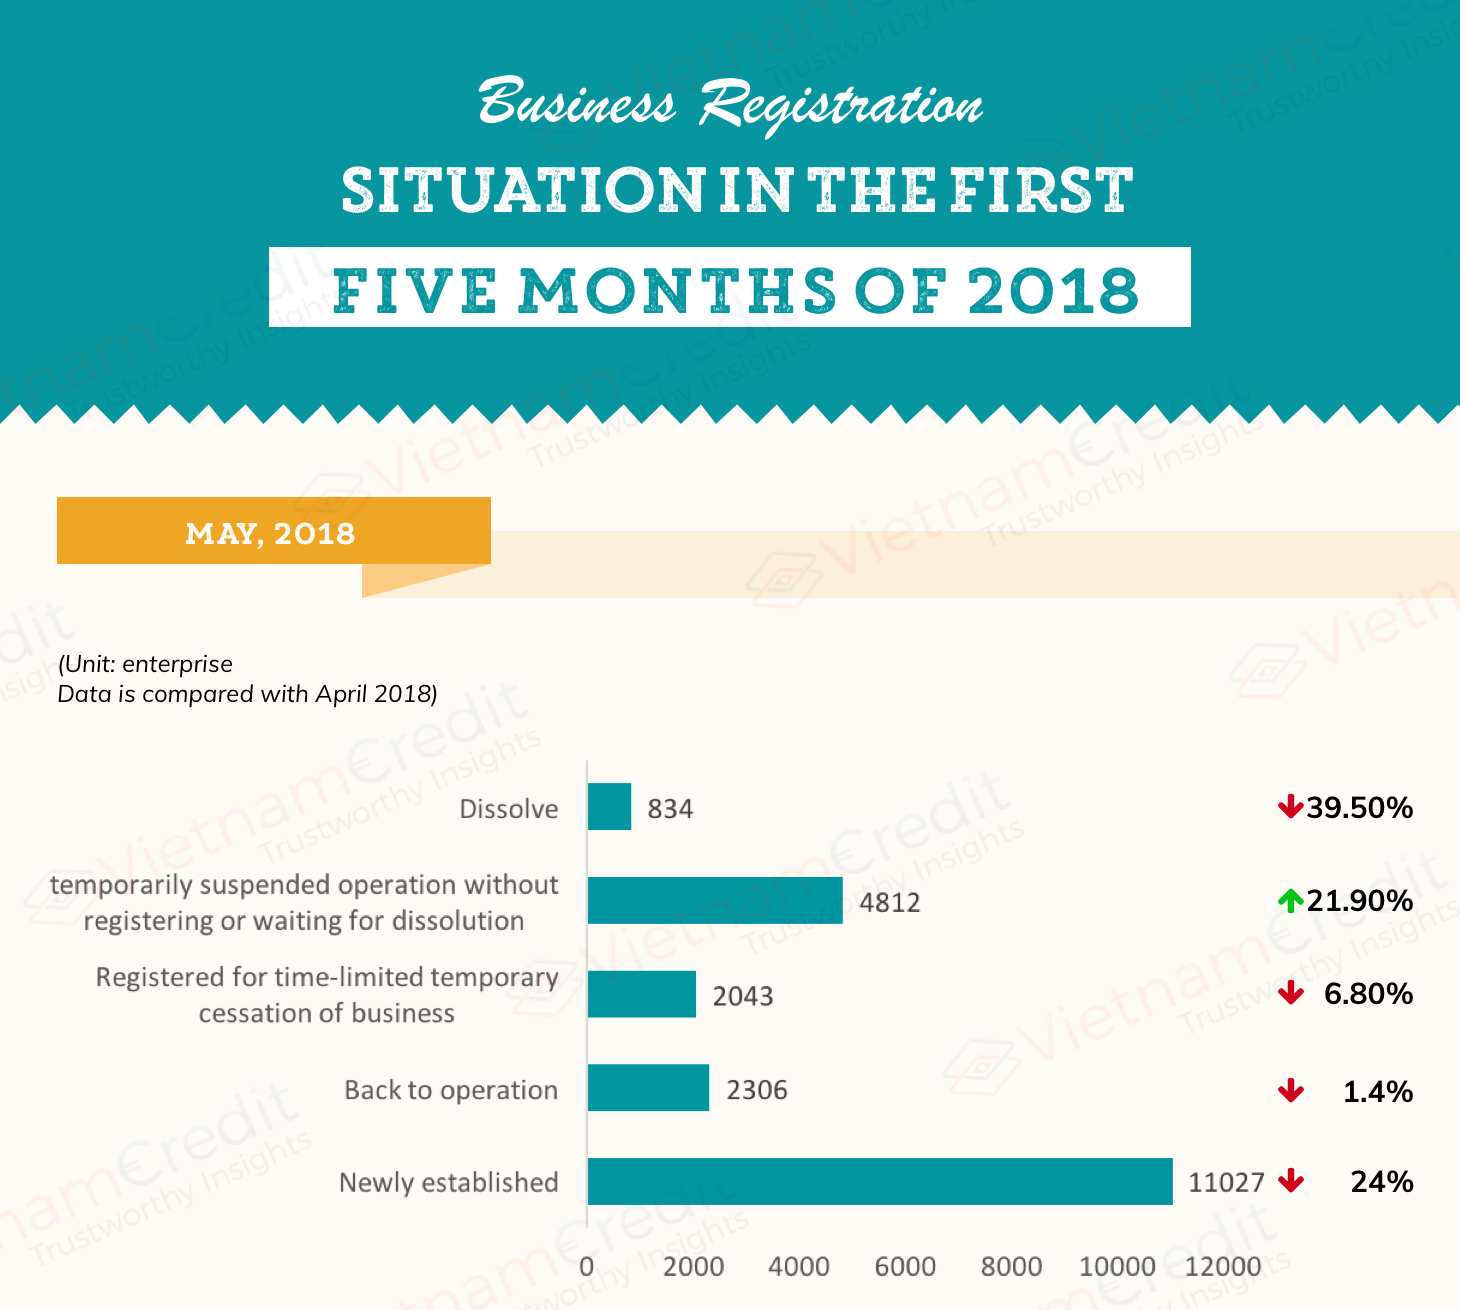 [INFOGRAPHIC] BUSINESS REGISTRATION SITUATION IN THE FIRST 5 MONTHS OF 2018